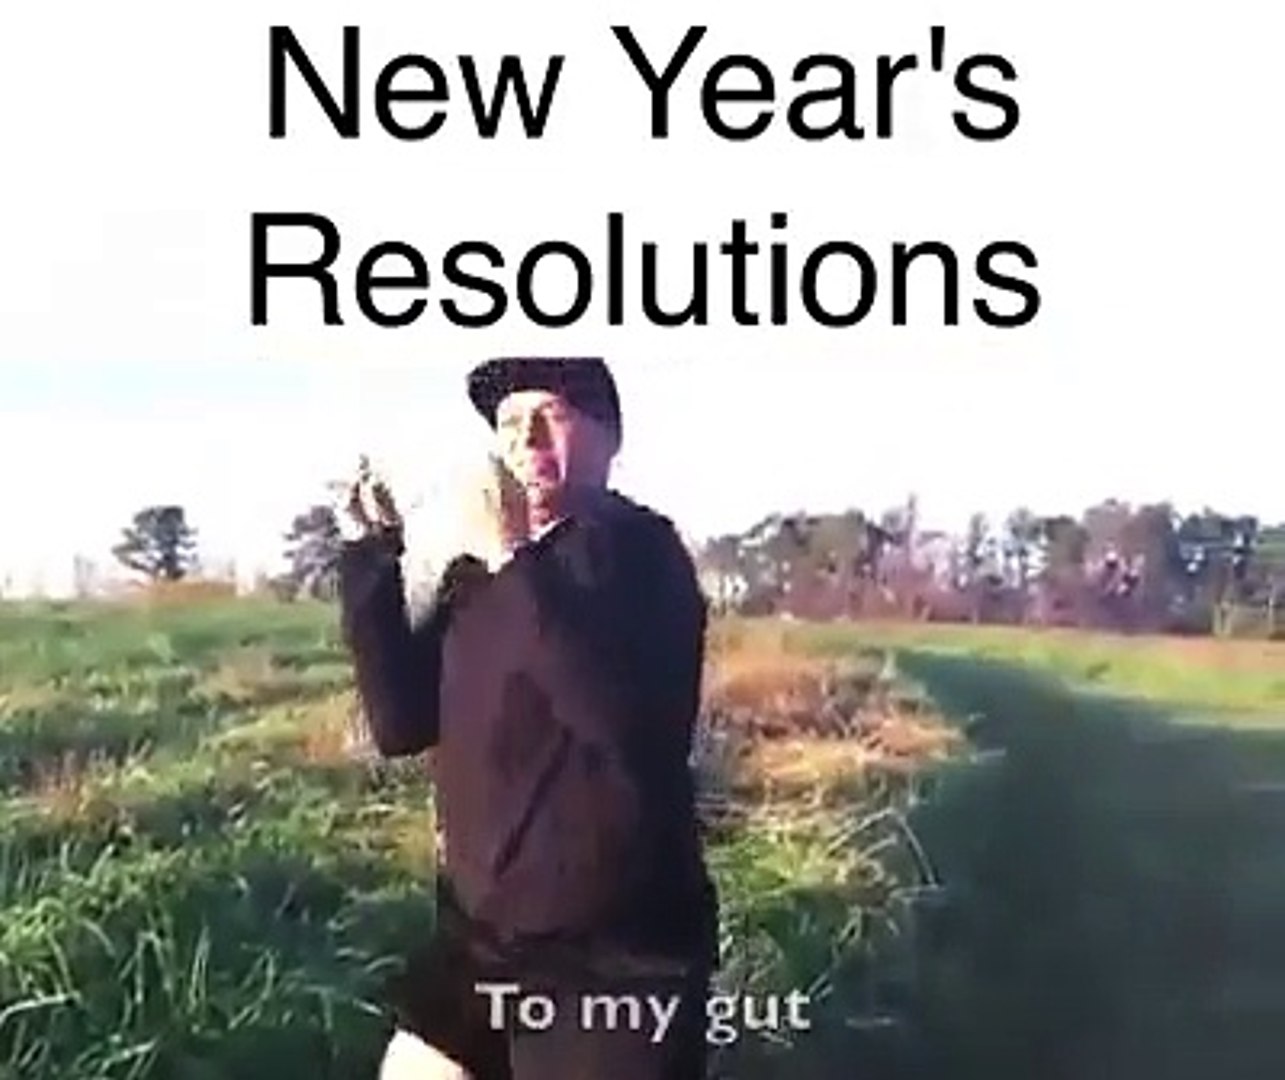 Adeles Hello Song New Years Resolution In Fitness - Funny